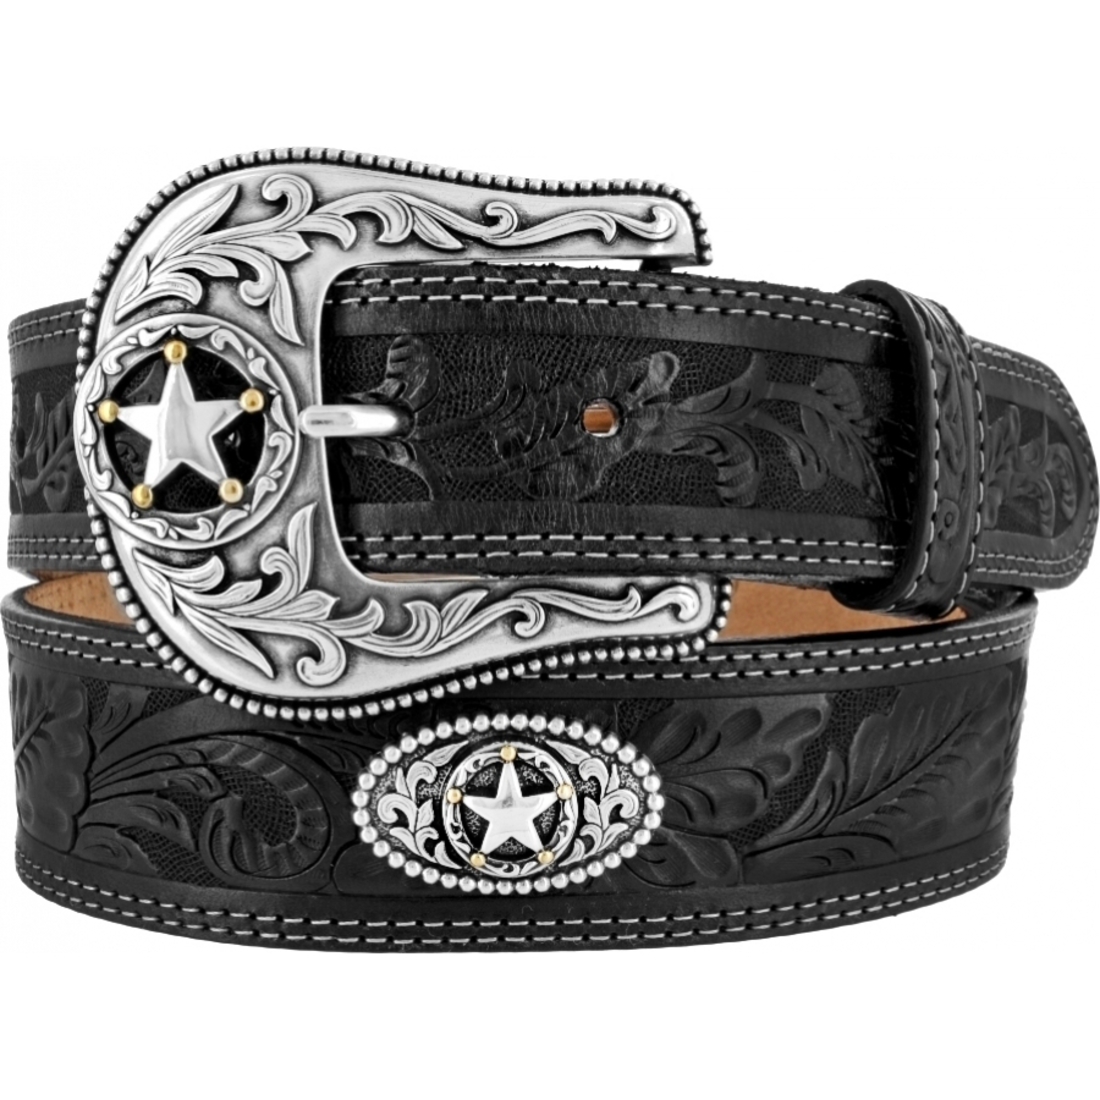 Justin Western Mens Belt Leather 5 Star Ranch Tooled Made In USA Black C12423 | eBay